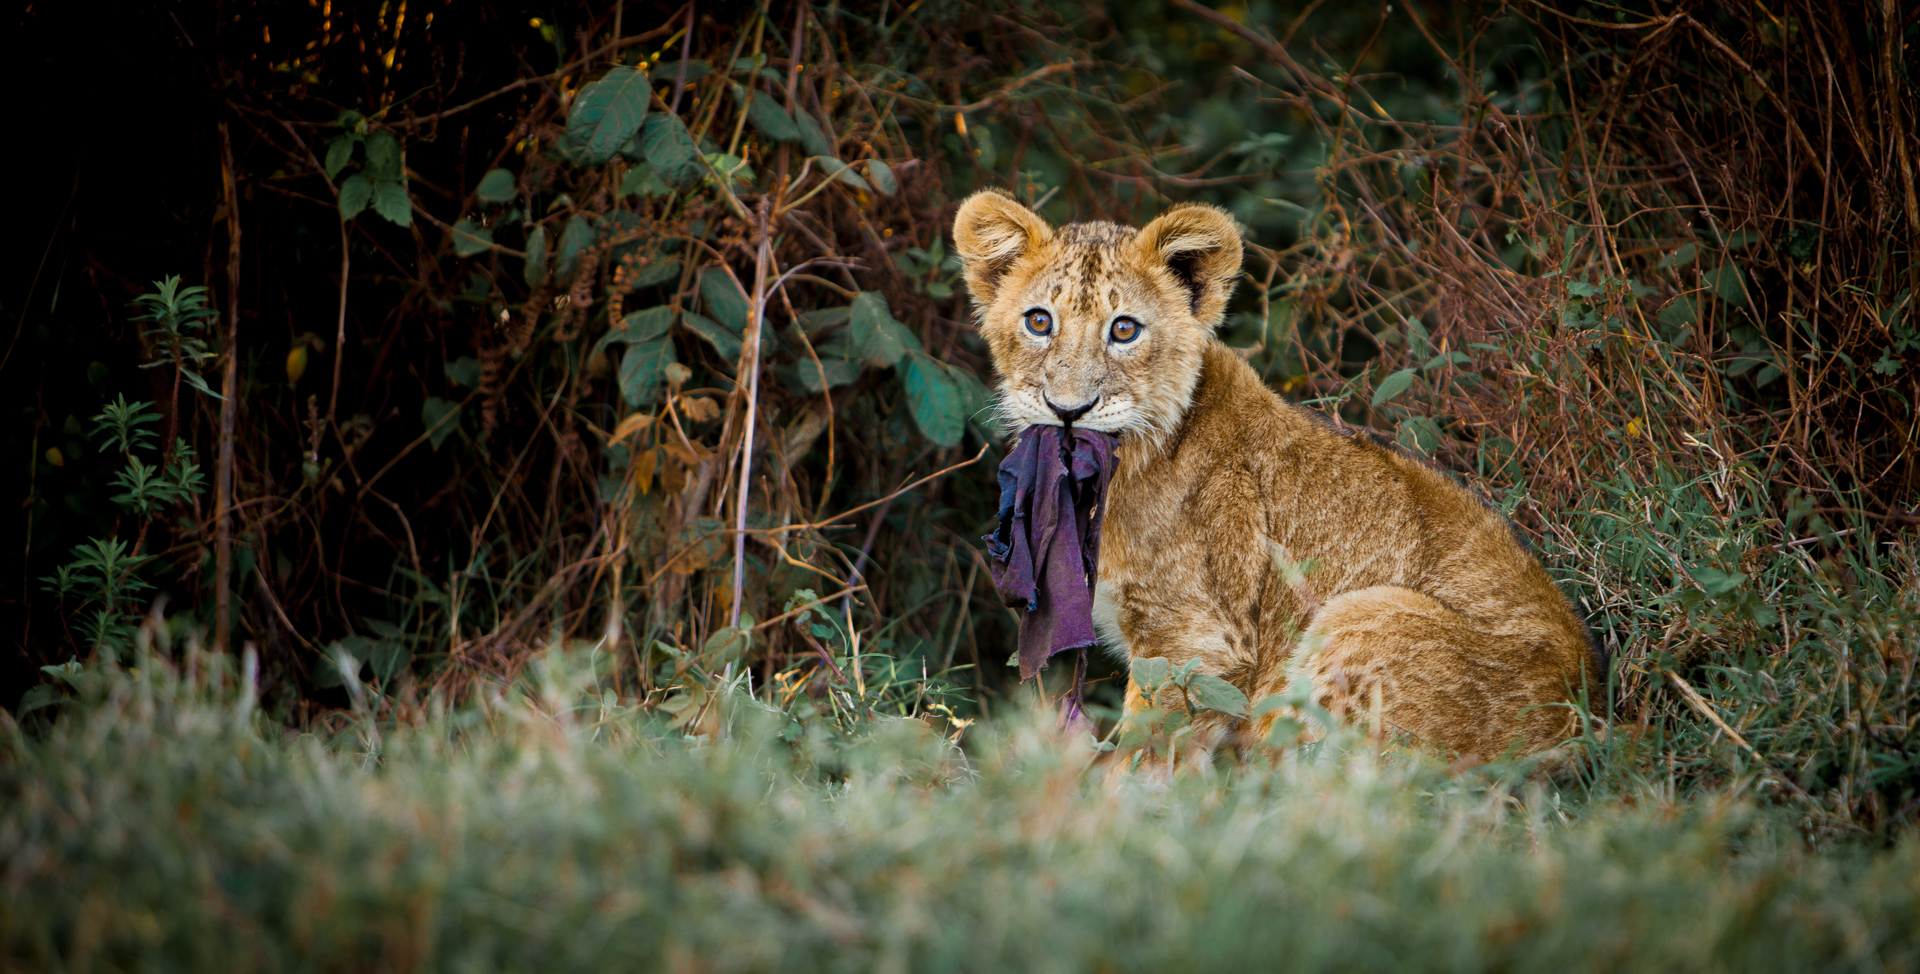 Lion cub with cloth in mouth